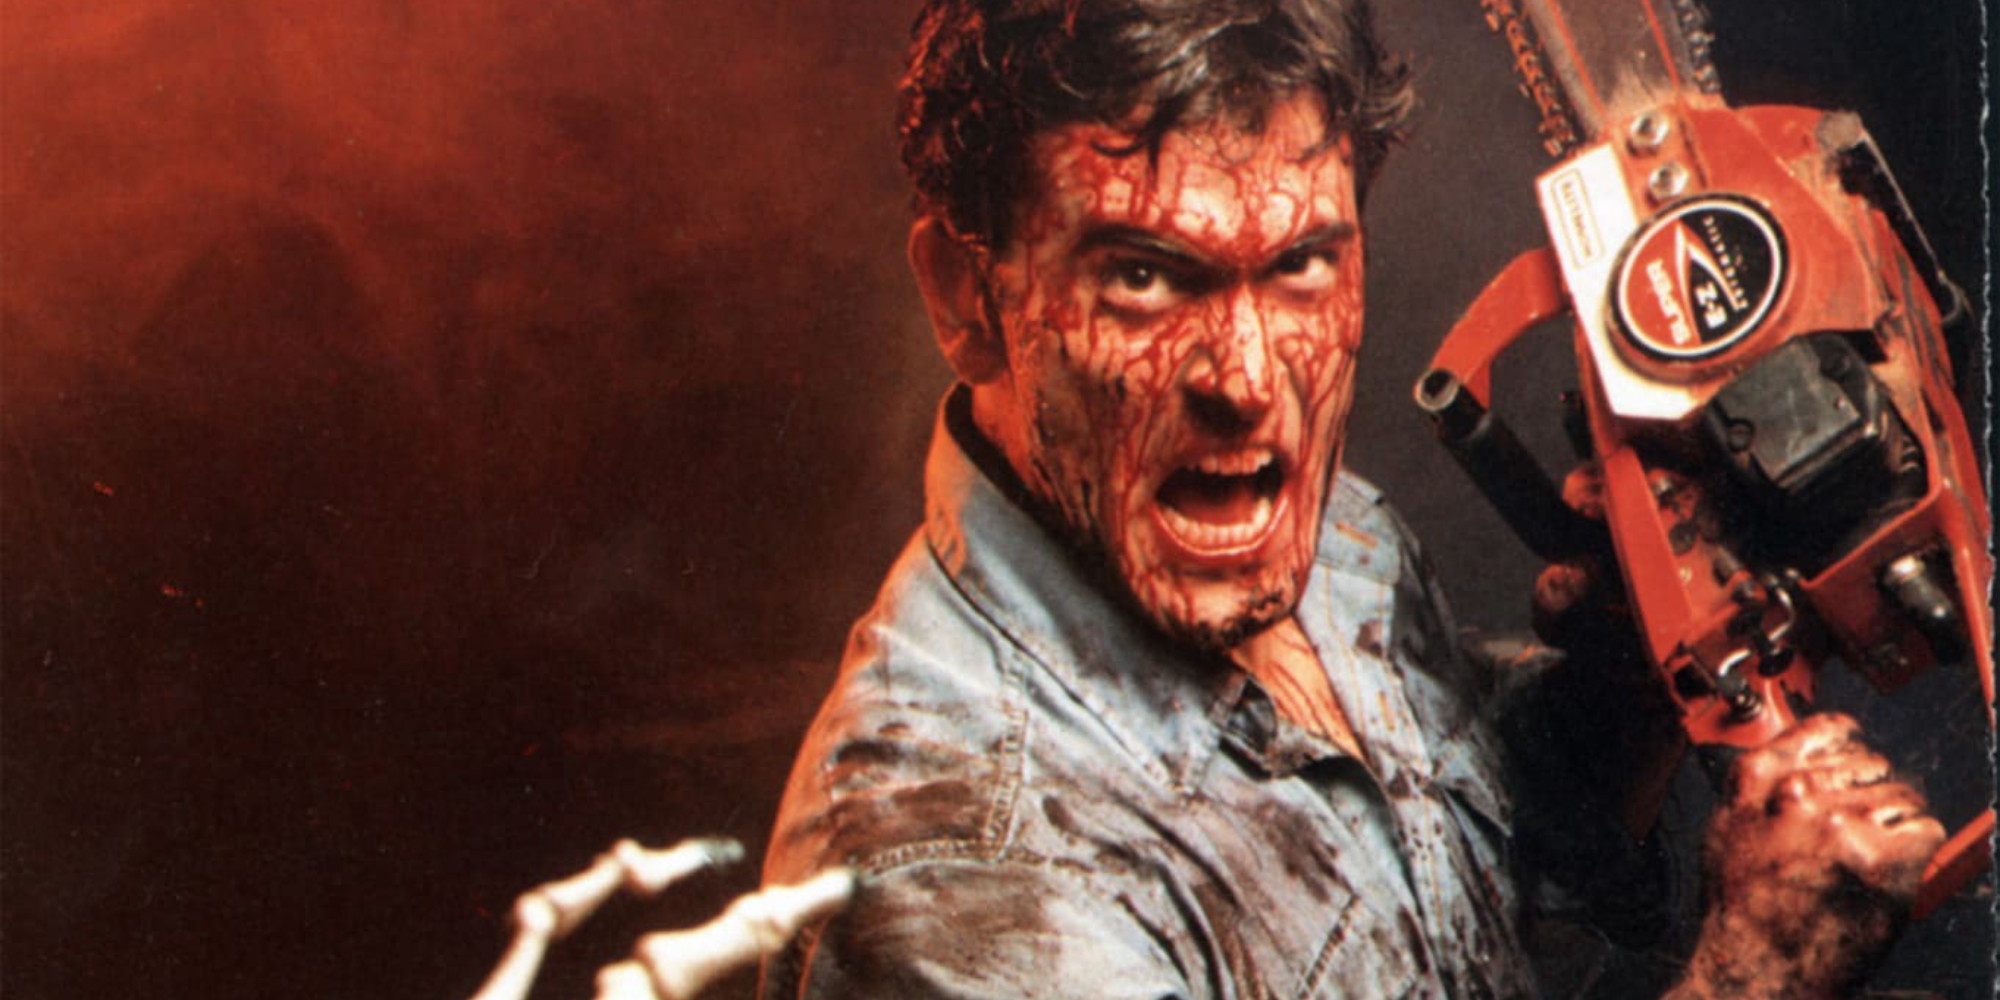 theevildead ash williams wields a chainsaw as a deadite attacks him